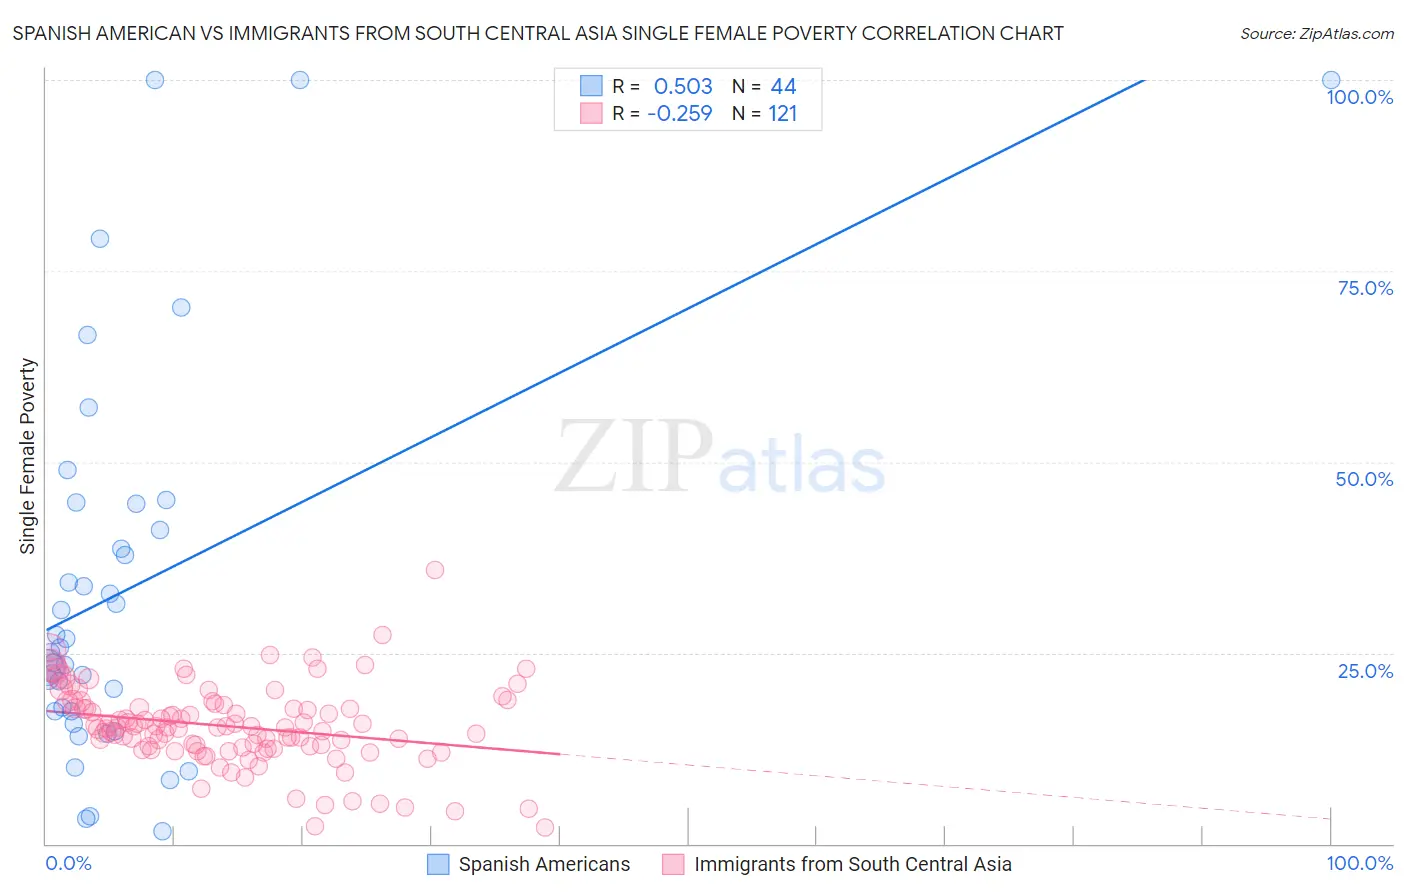 Spanish American vs Immigrants from South Central Asia Single Female Poverty